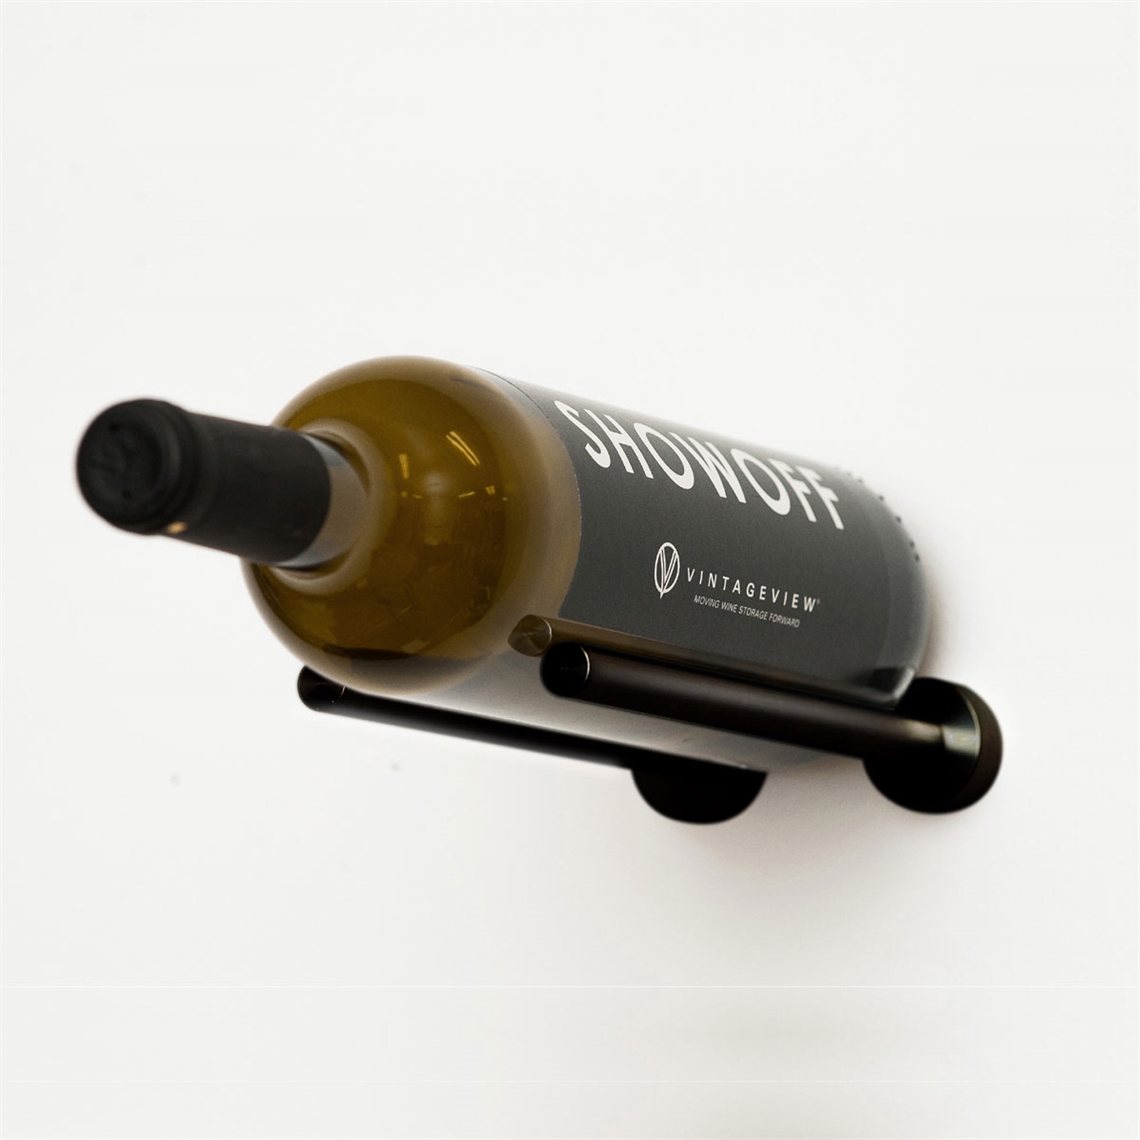 View more how to order a bespoke wine rack from our Wall Mounted Wine Racks range